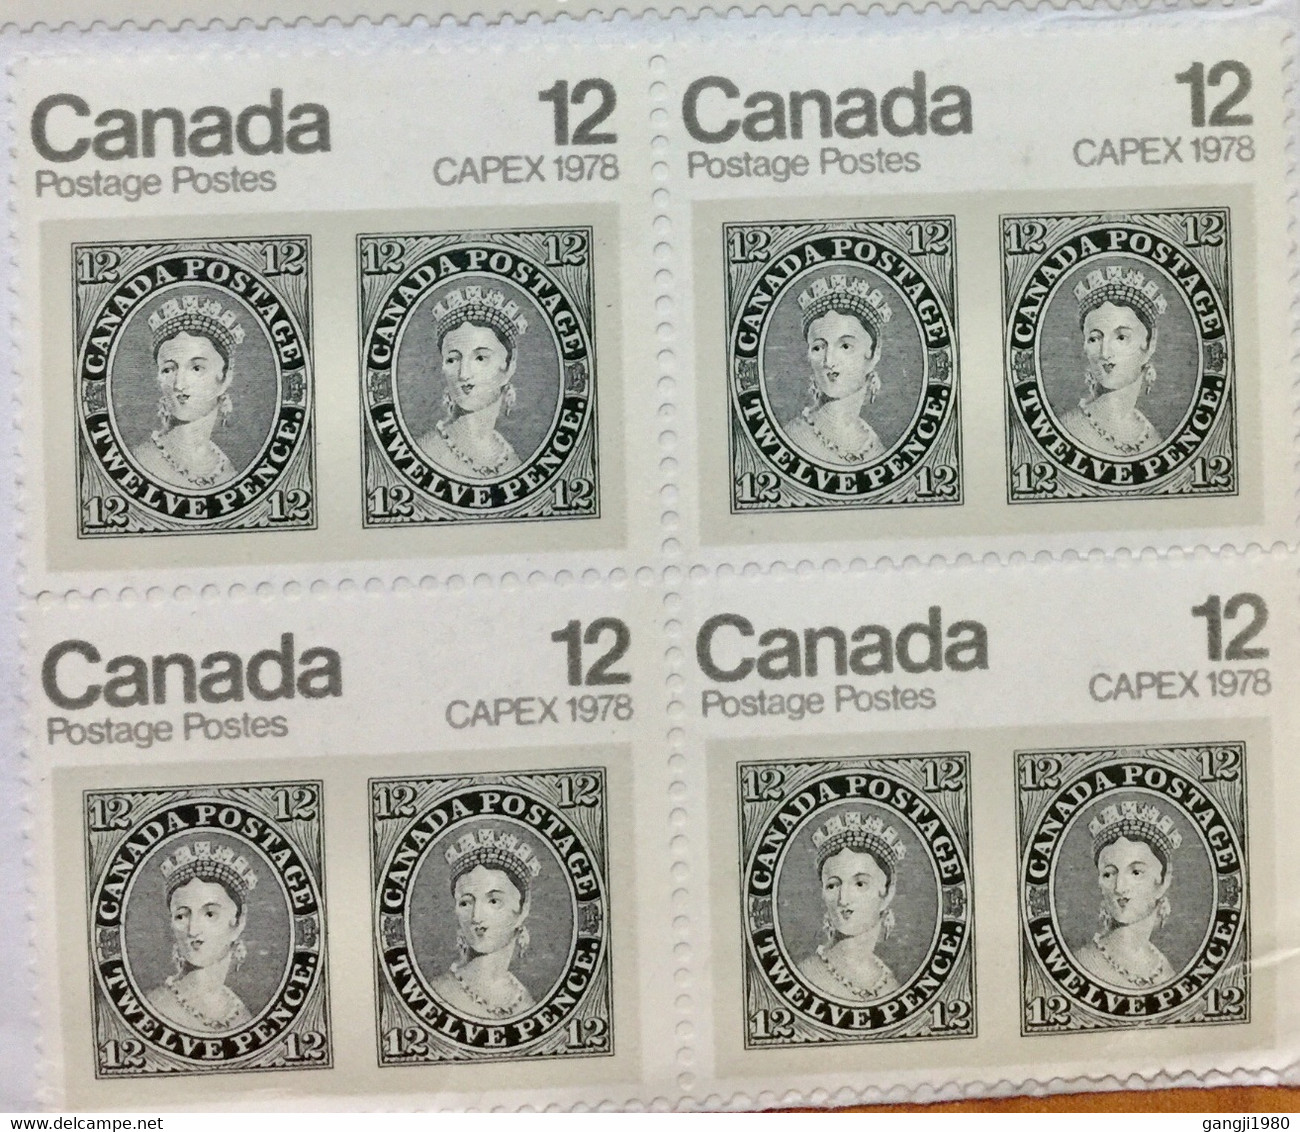 CANADA 2020, CORONA VIROES PERIOD 15 STAMPS ON COVER ALL WITHOUT CANCELLATION,ART PAINTING,NATURE ,LEOPARD,ANIMAL,QUEEN, - Storia Postale